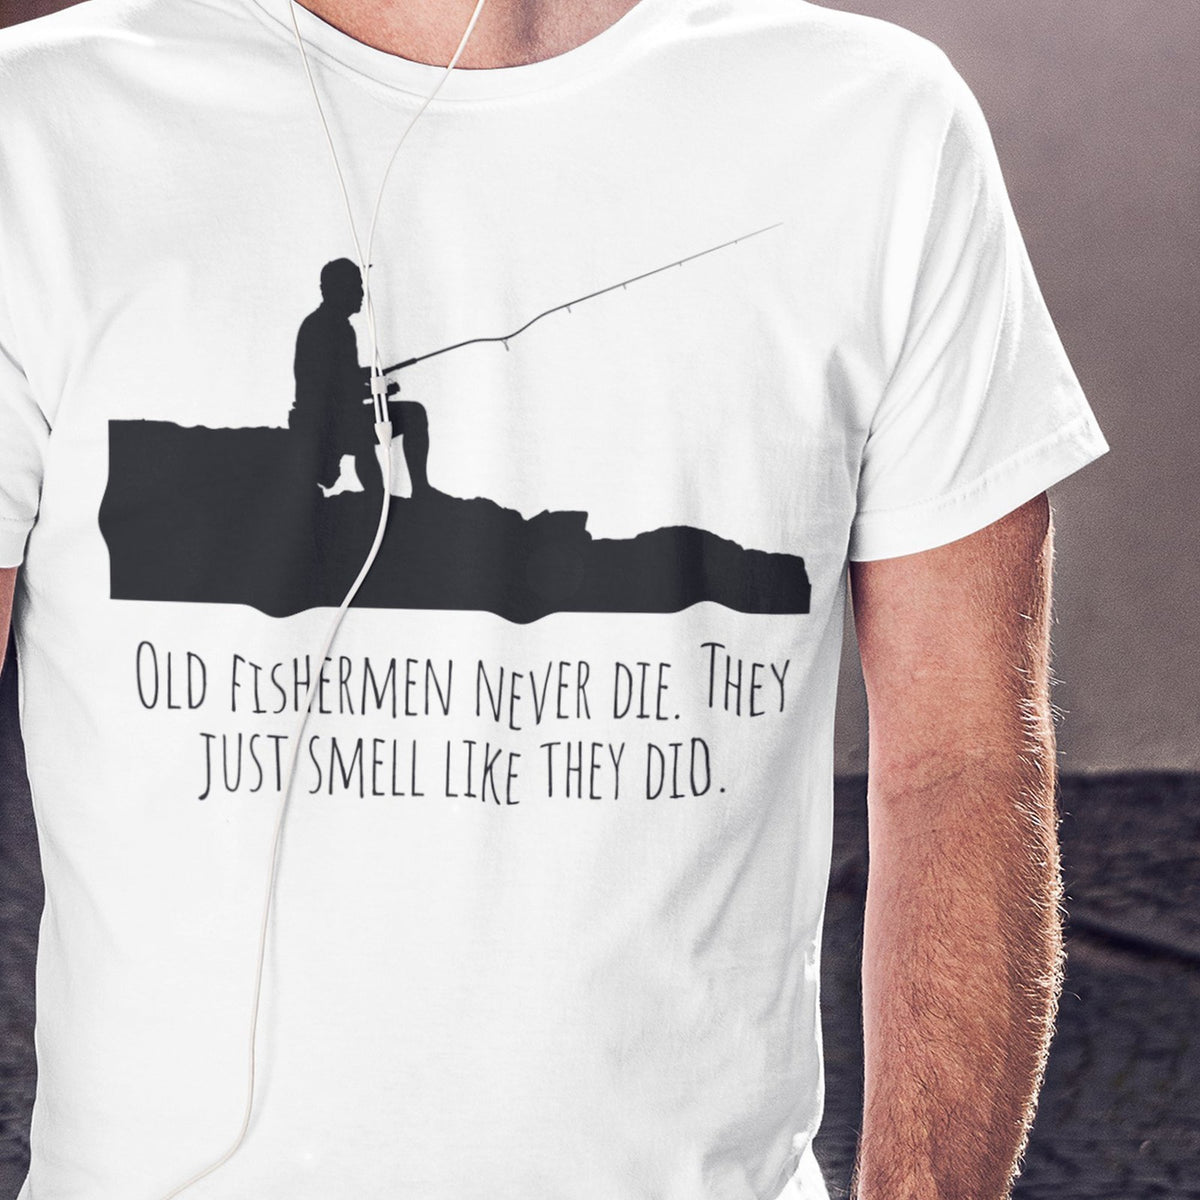 Old Fishermen Never Die. They Just Smell Like They Did. - Old Tee